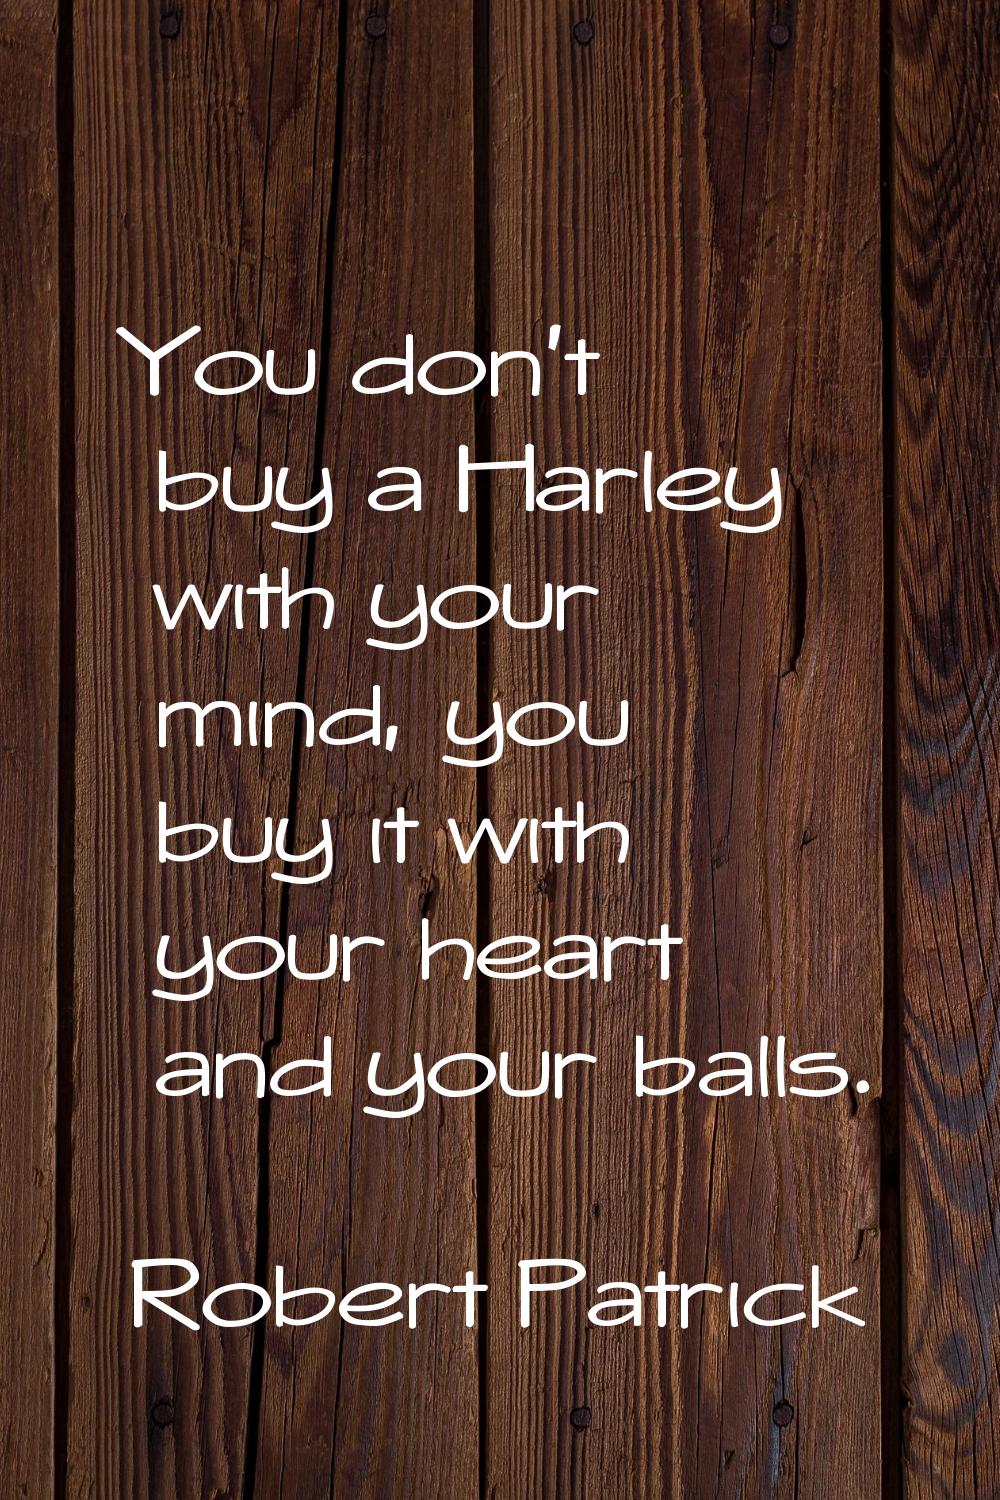 You don't buy a Harley with your mind, you buy it with your heart and your balls.